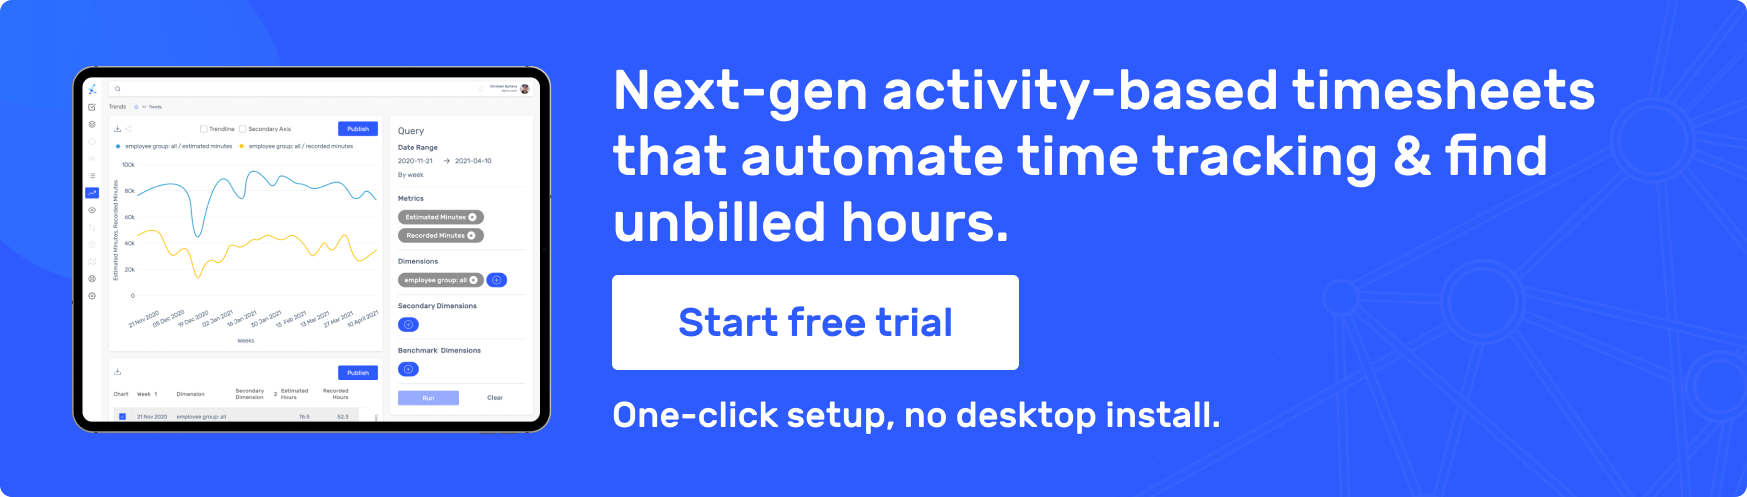 Fully automated, smart time tracking that drives revenue - CTA visual-1